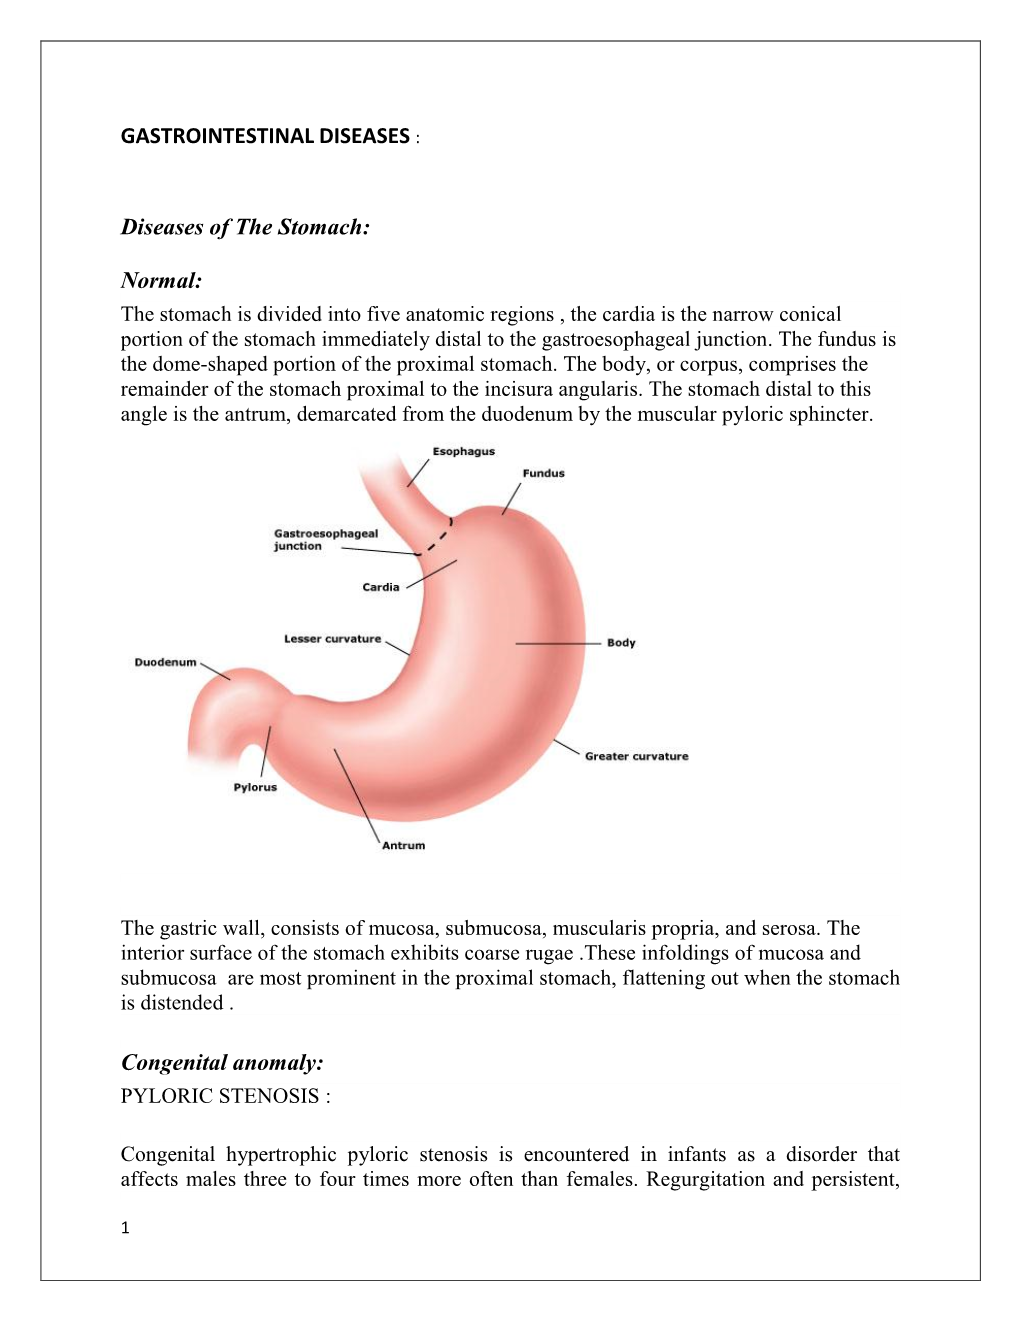 GASTROINTESTINAL DISEASES : Diseases of the Stomach: Normal